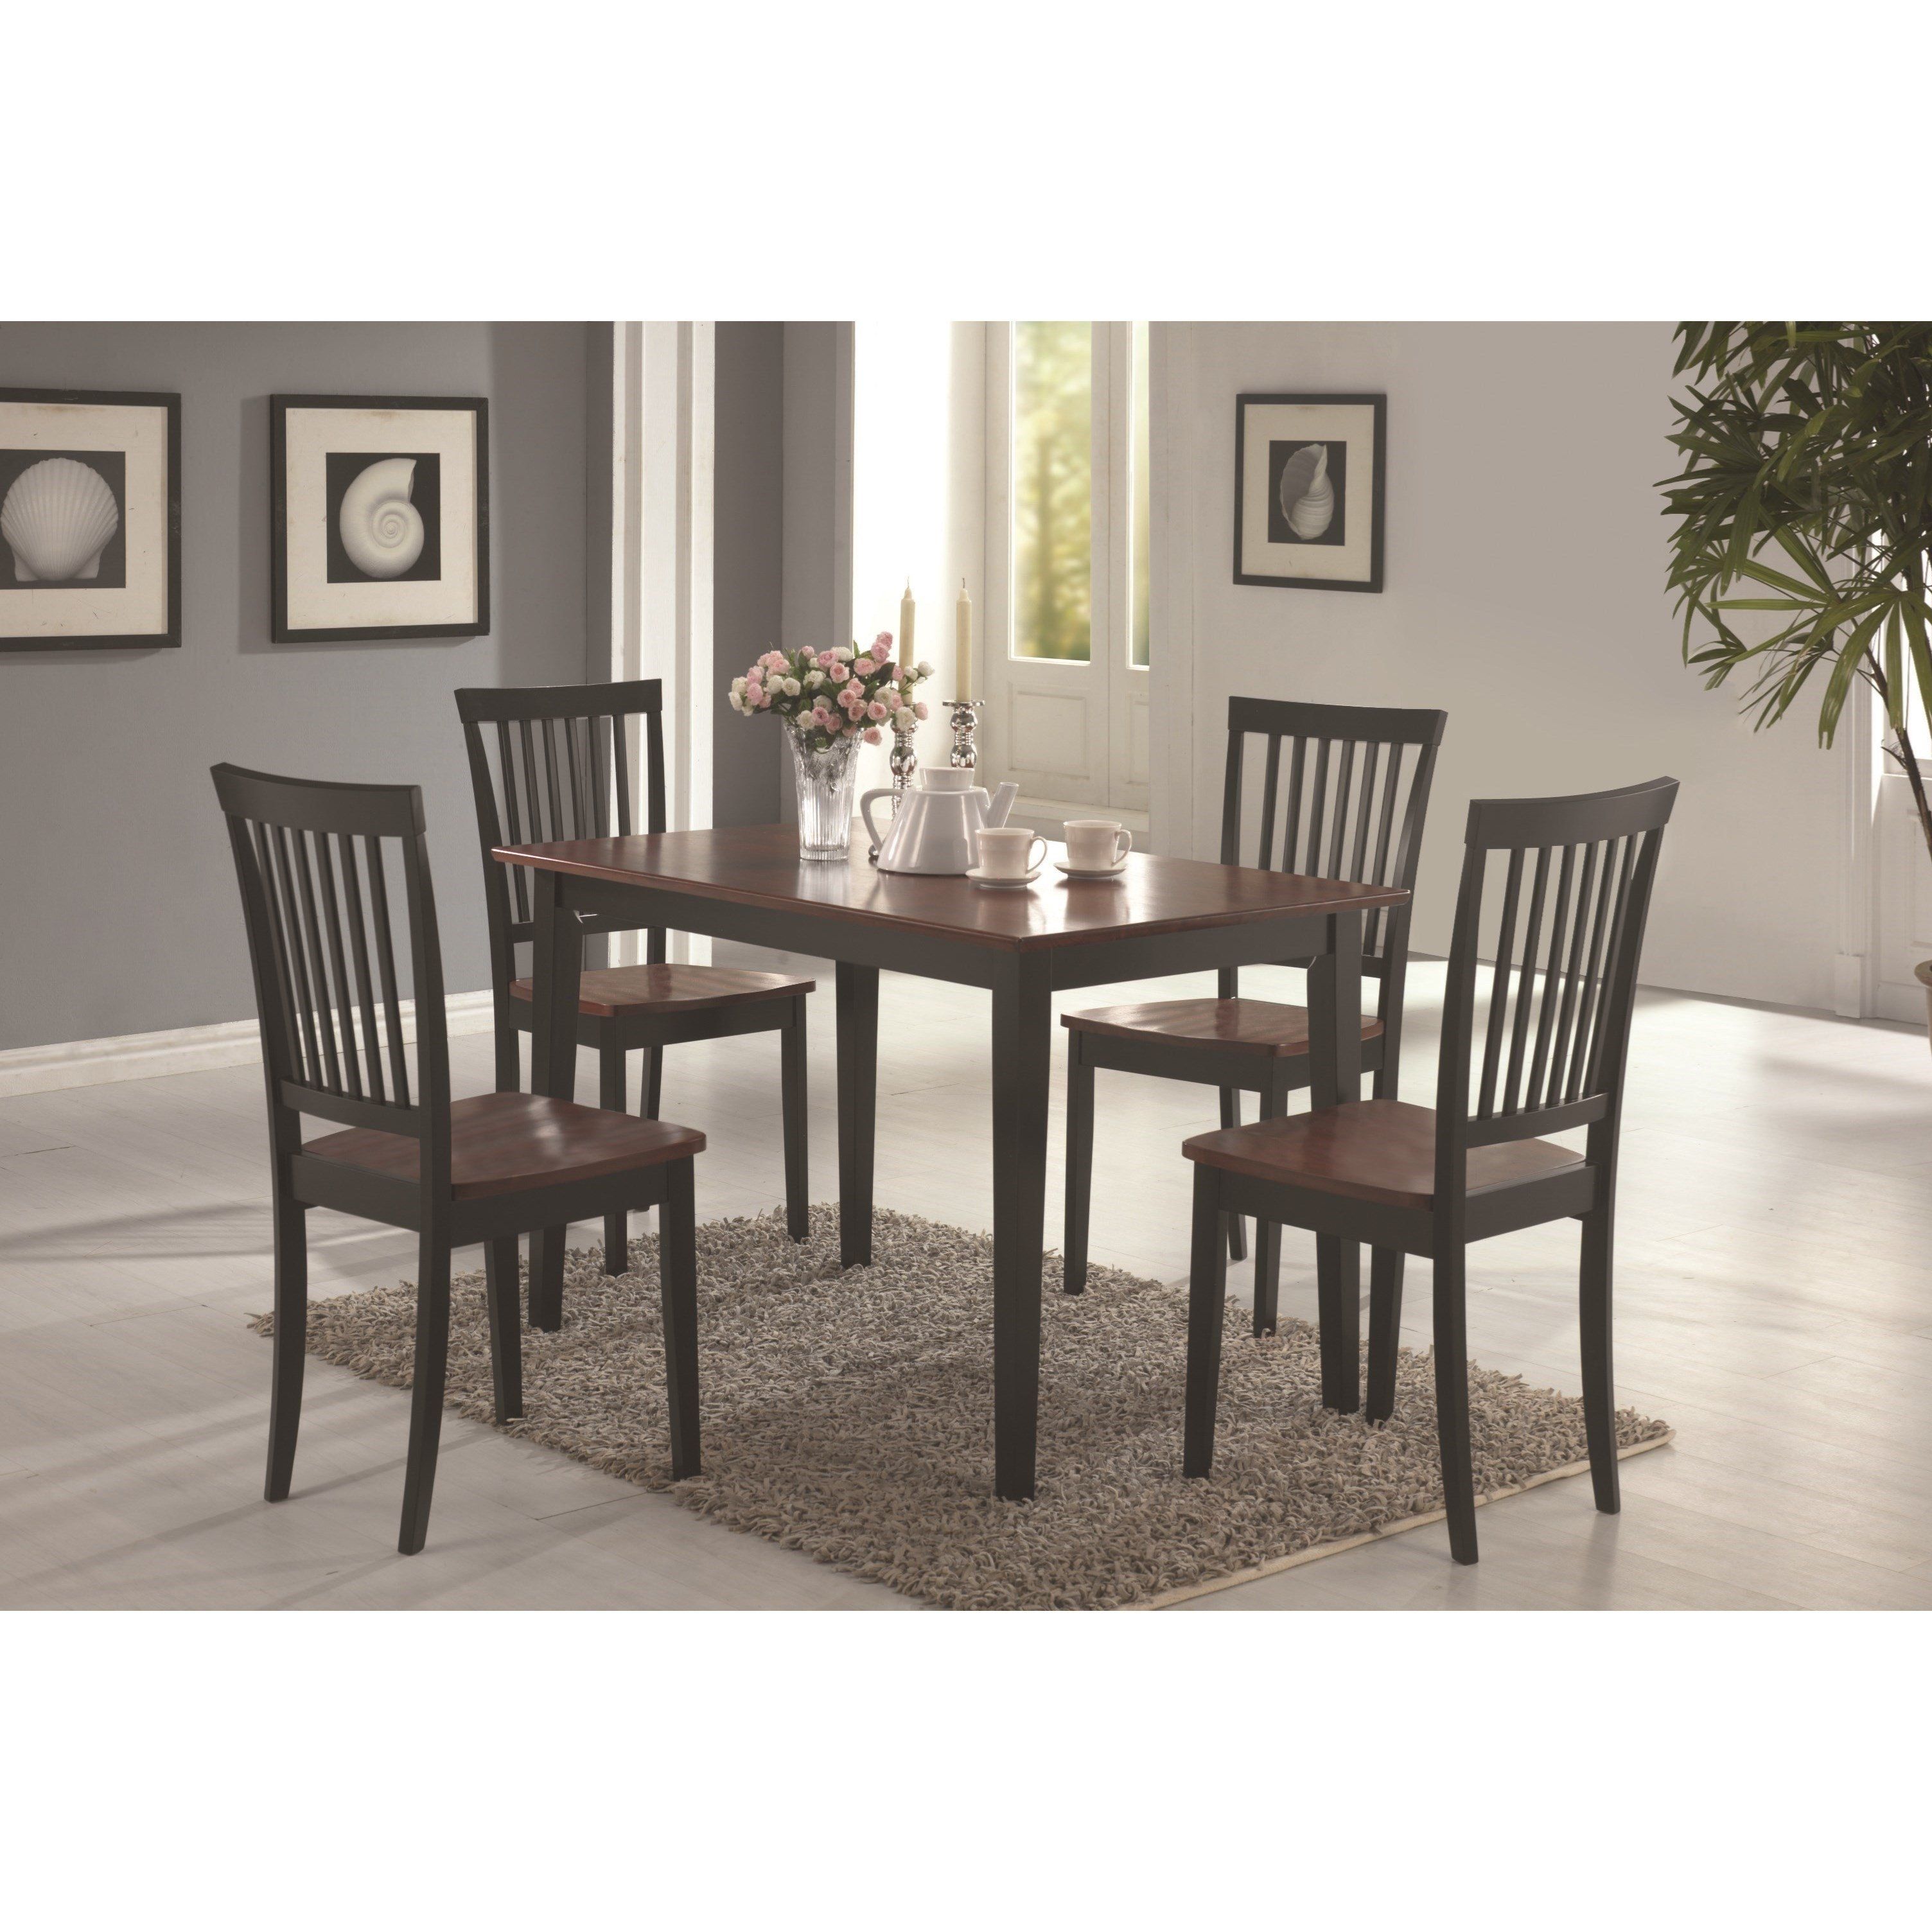 Charlton Home Pugh Sturdy Wooden 5 Piece Dining Set | Wayfair Regarding Newest Candice Ii 5 Piece Round Dining Sets With Slat Back Side Chairs (View 4 of 20)